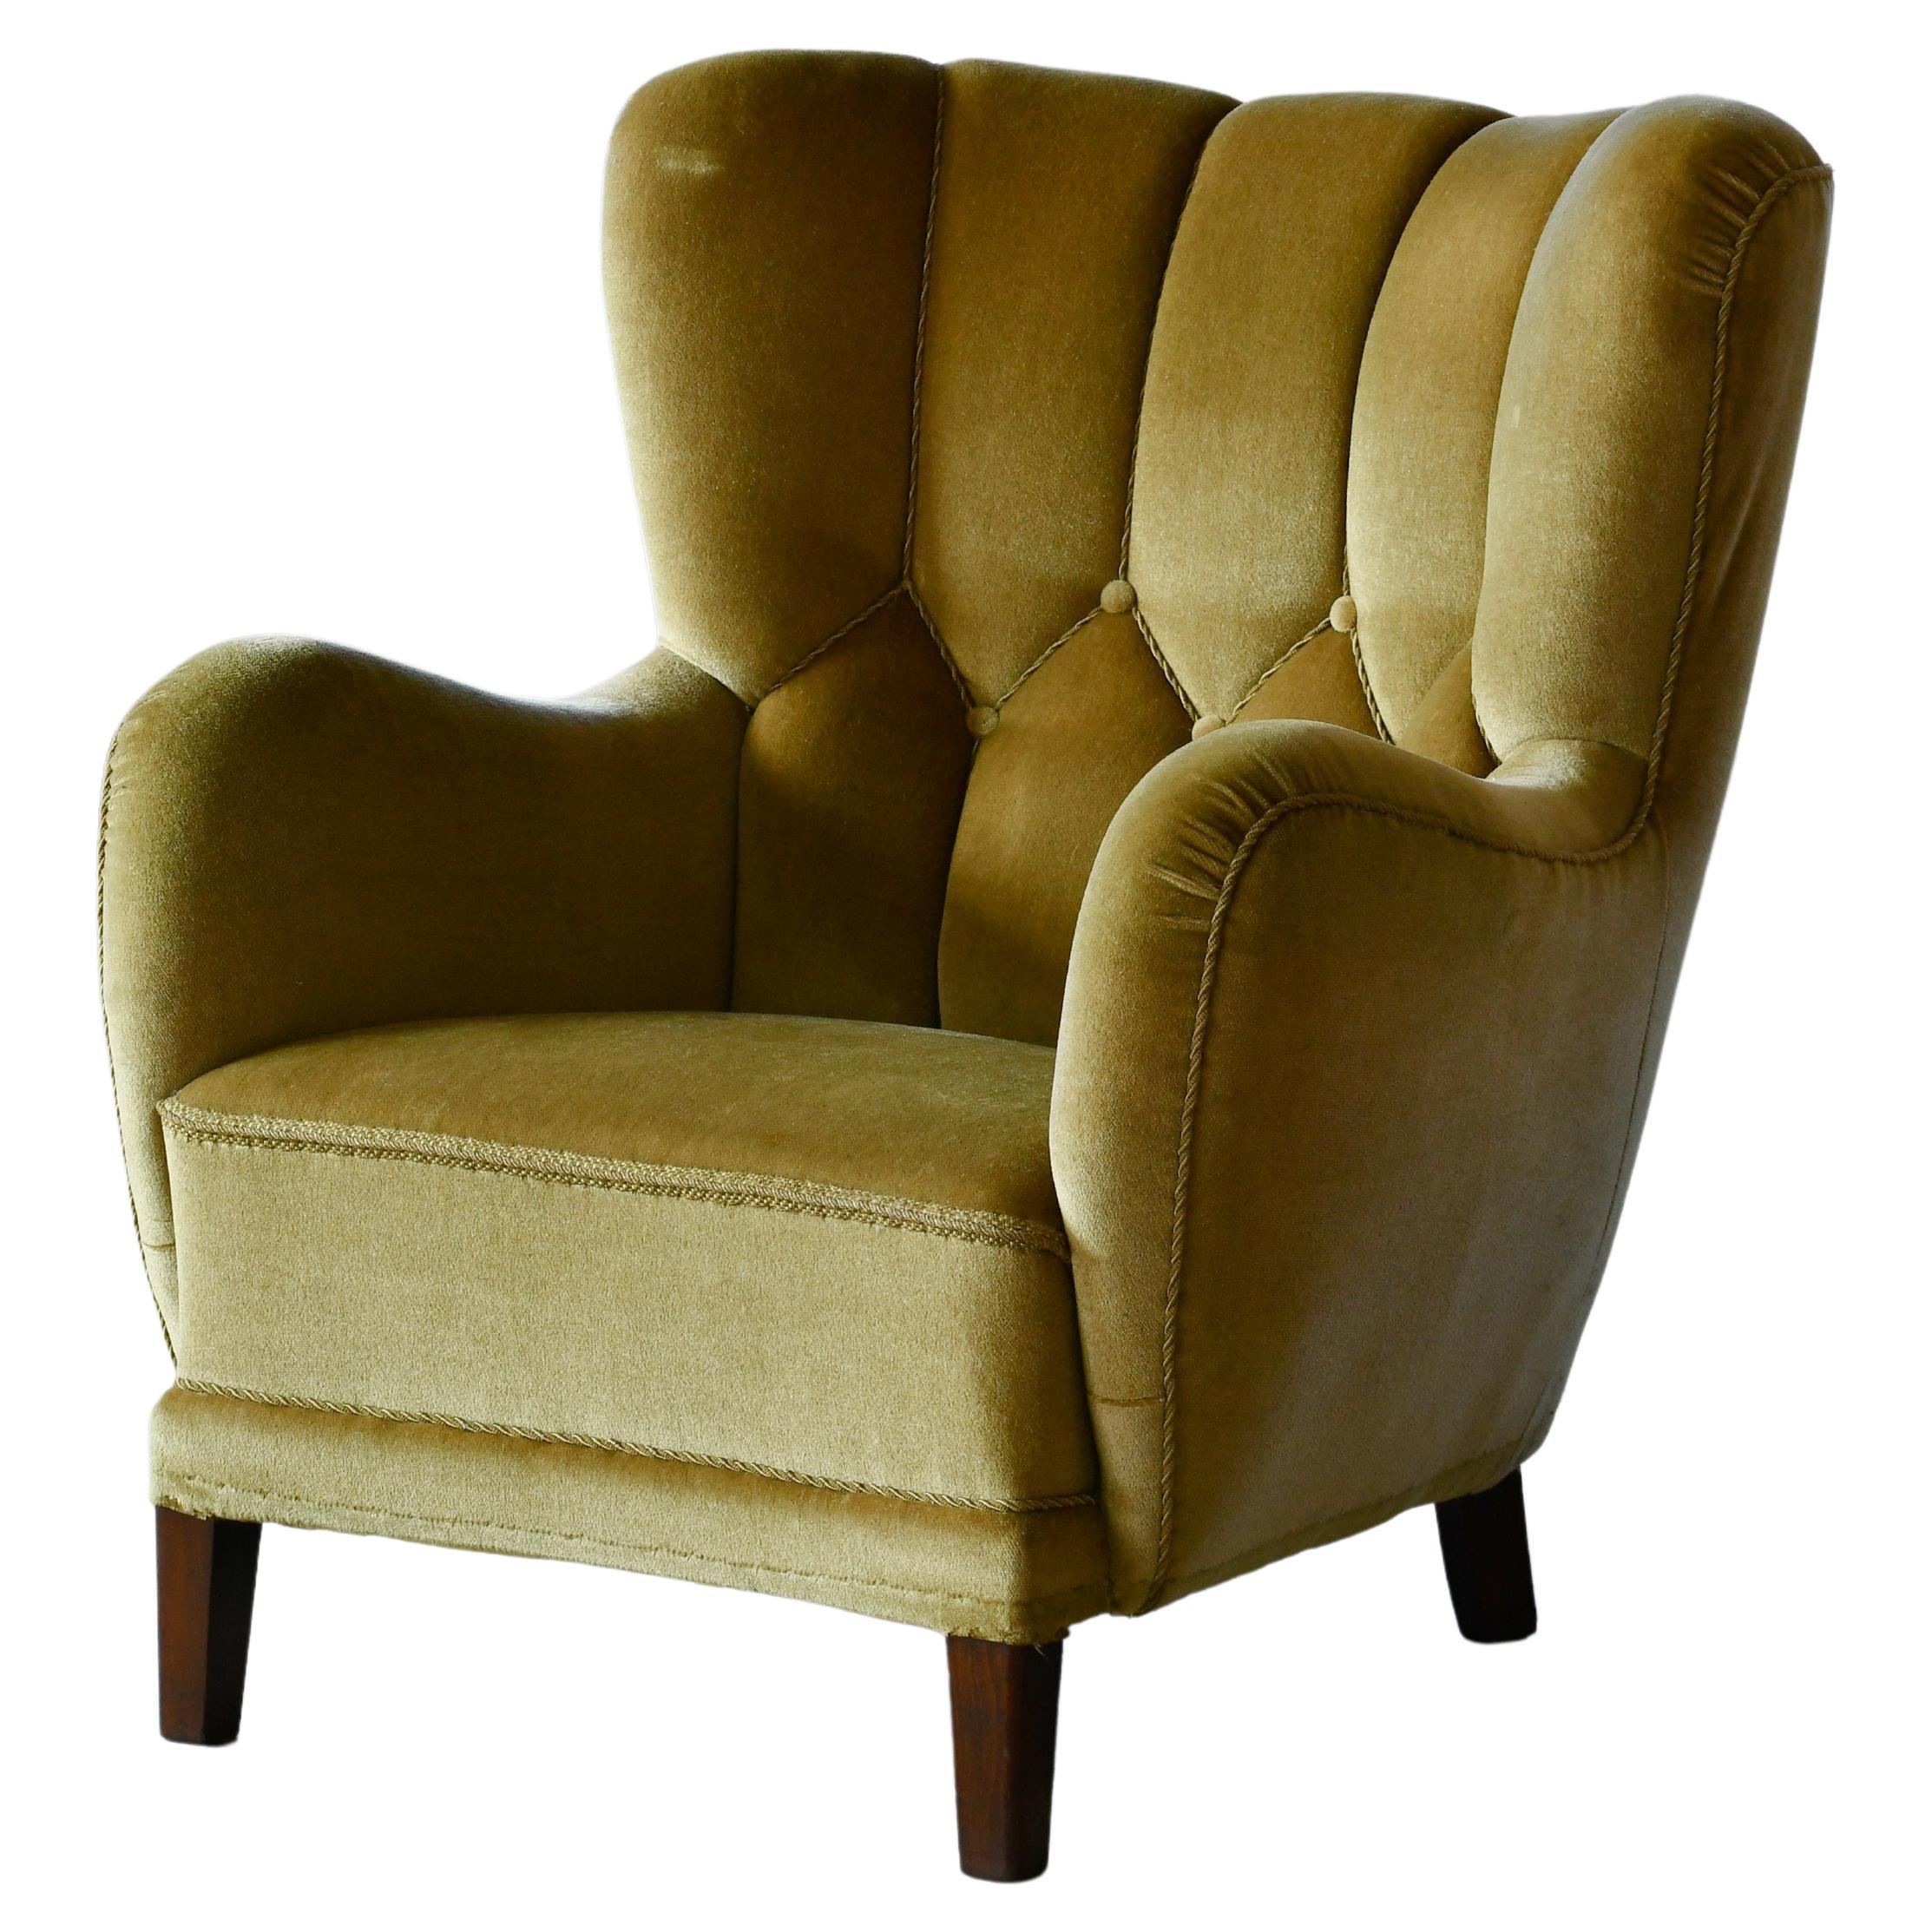 Danish 1940s Channel Back Semi Tall Lounge Chair in Green Mohair